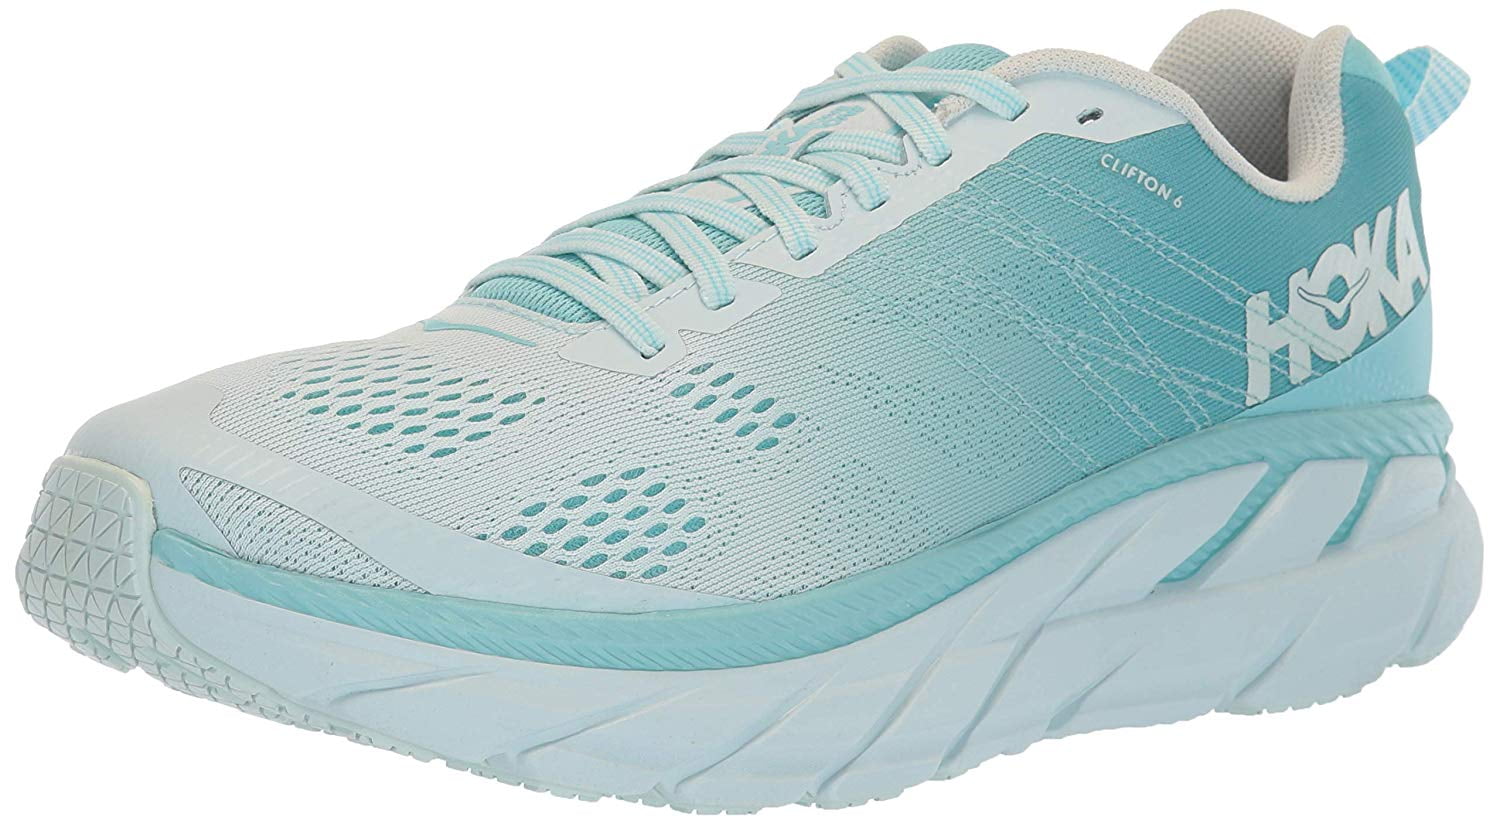 1102873 ASWB HOKA ONE ONE CLIFTON 6 Women's Running Shoes Size 8 NEW 